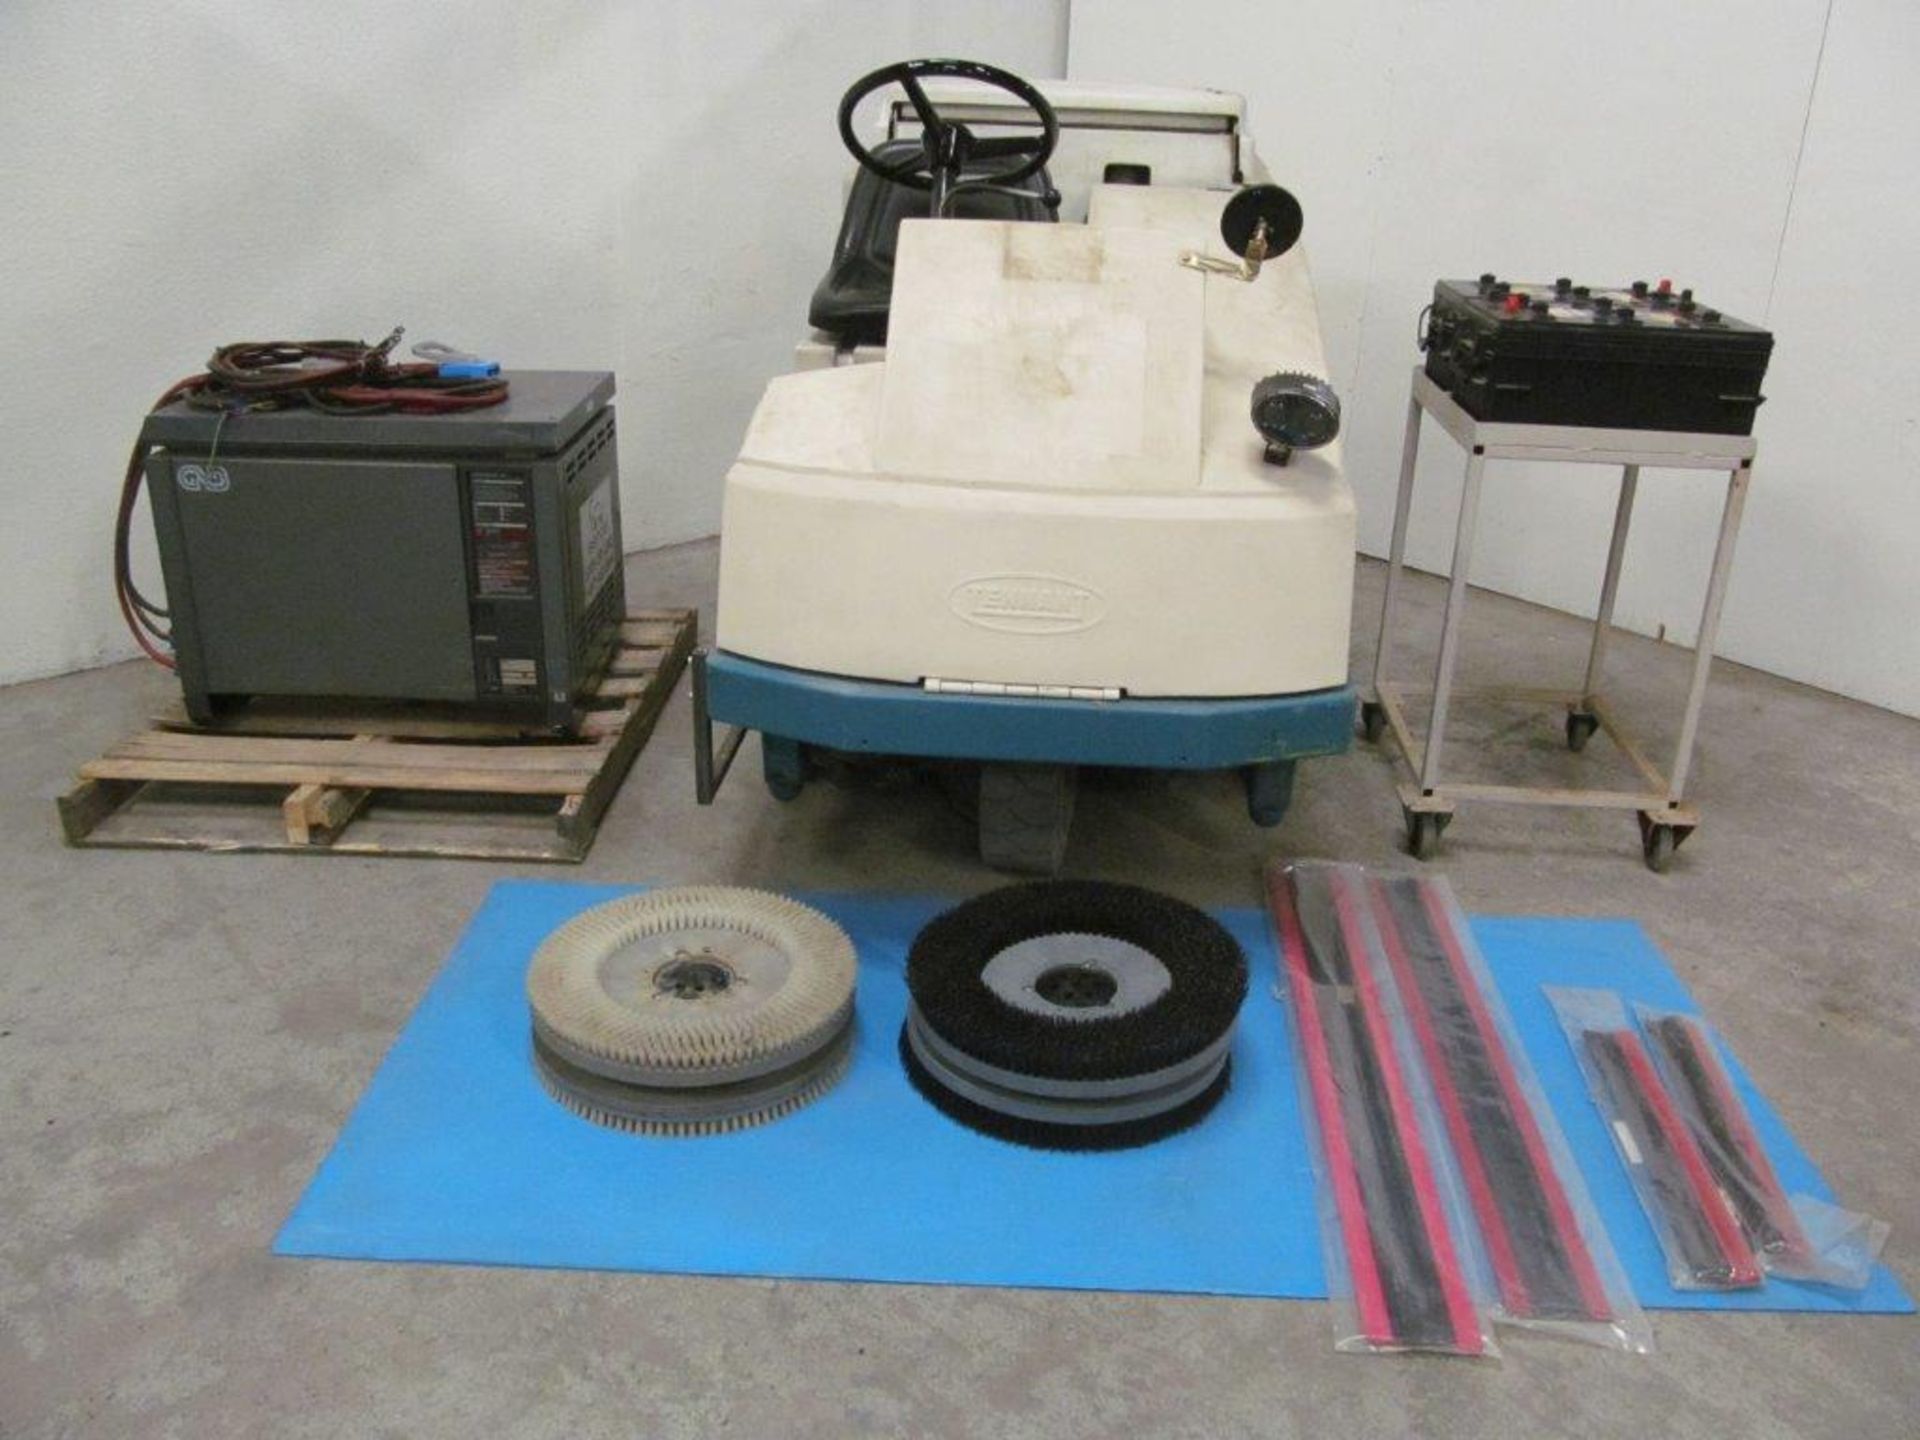 TENNANT ELECTRIC FLOOR SWEEPER, C/W CHARGER 36V, SPARE BATTERIES & BRUSHES (CONDITION UNKNOWN) - Image 2 of 8